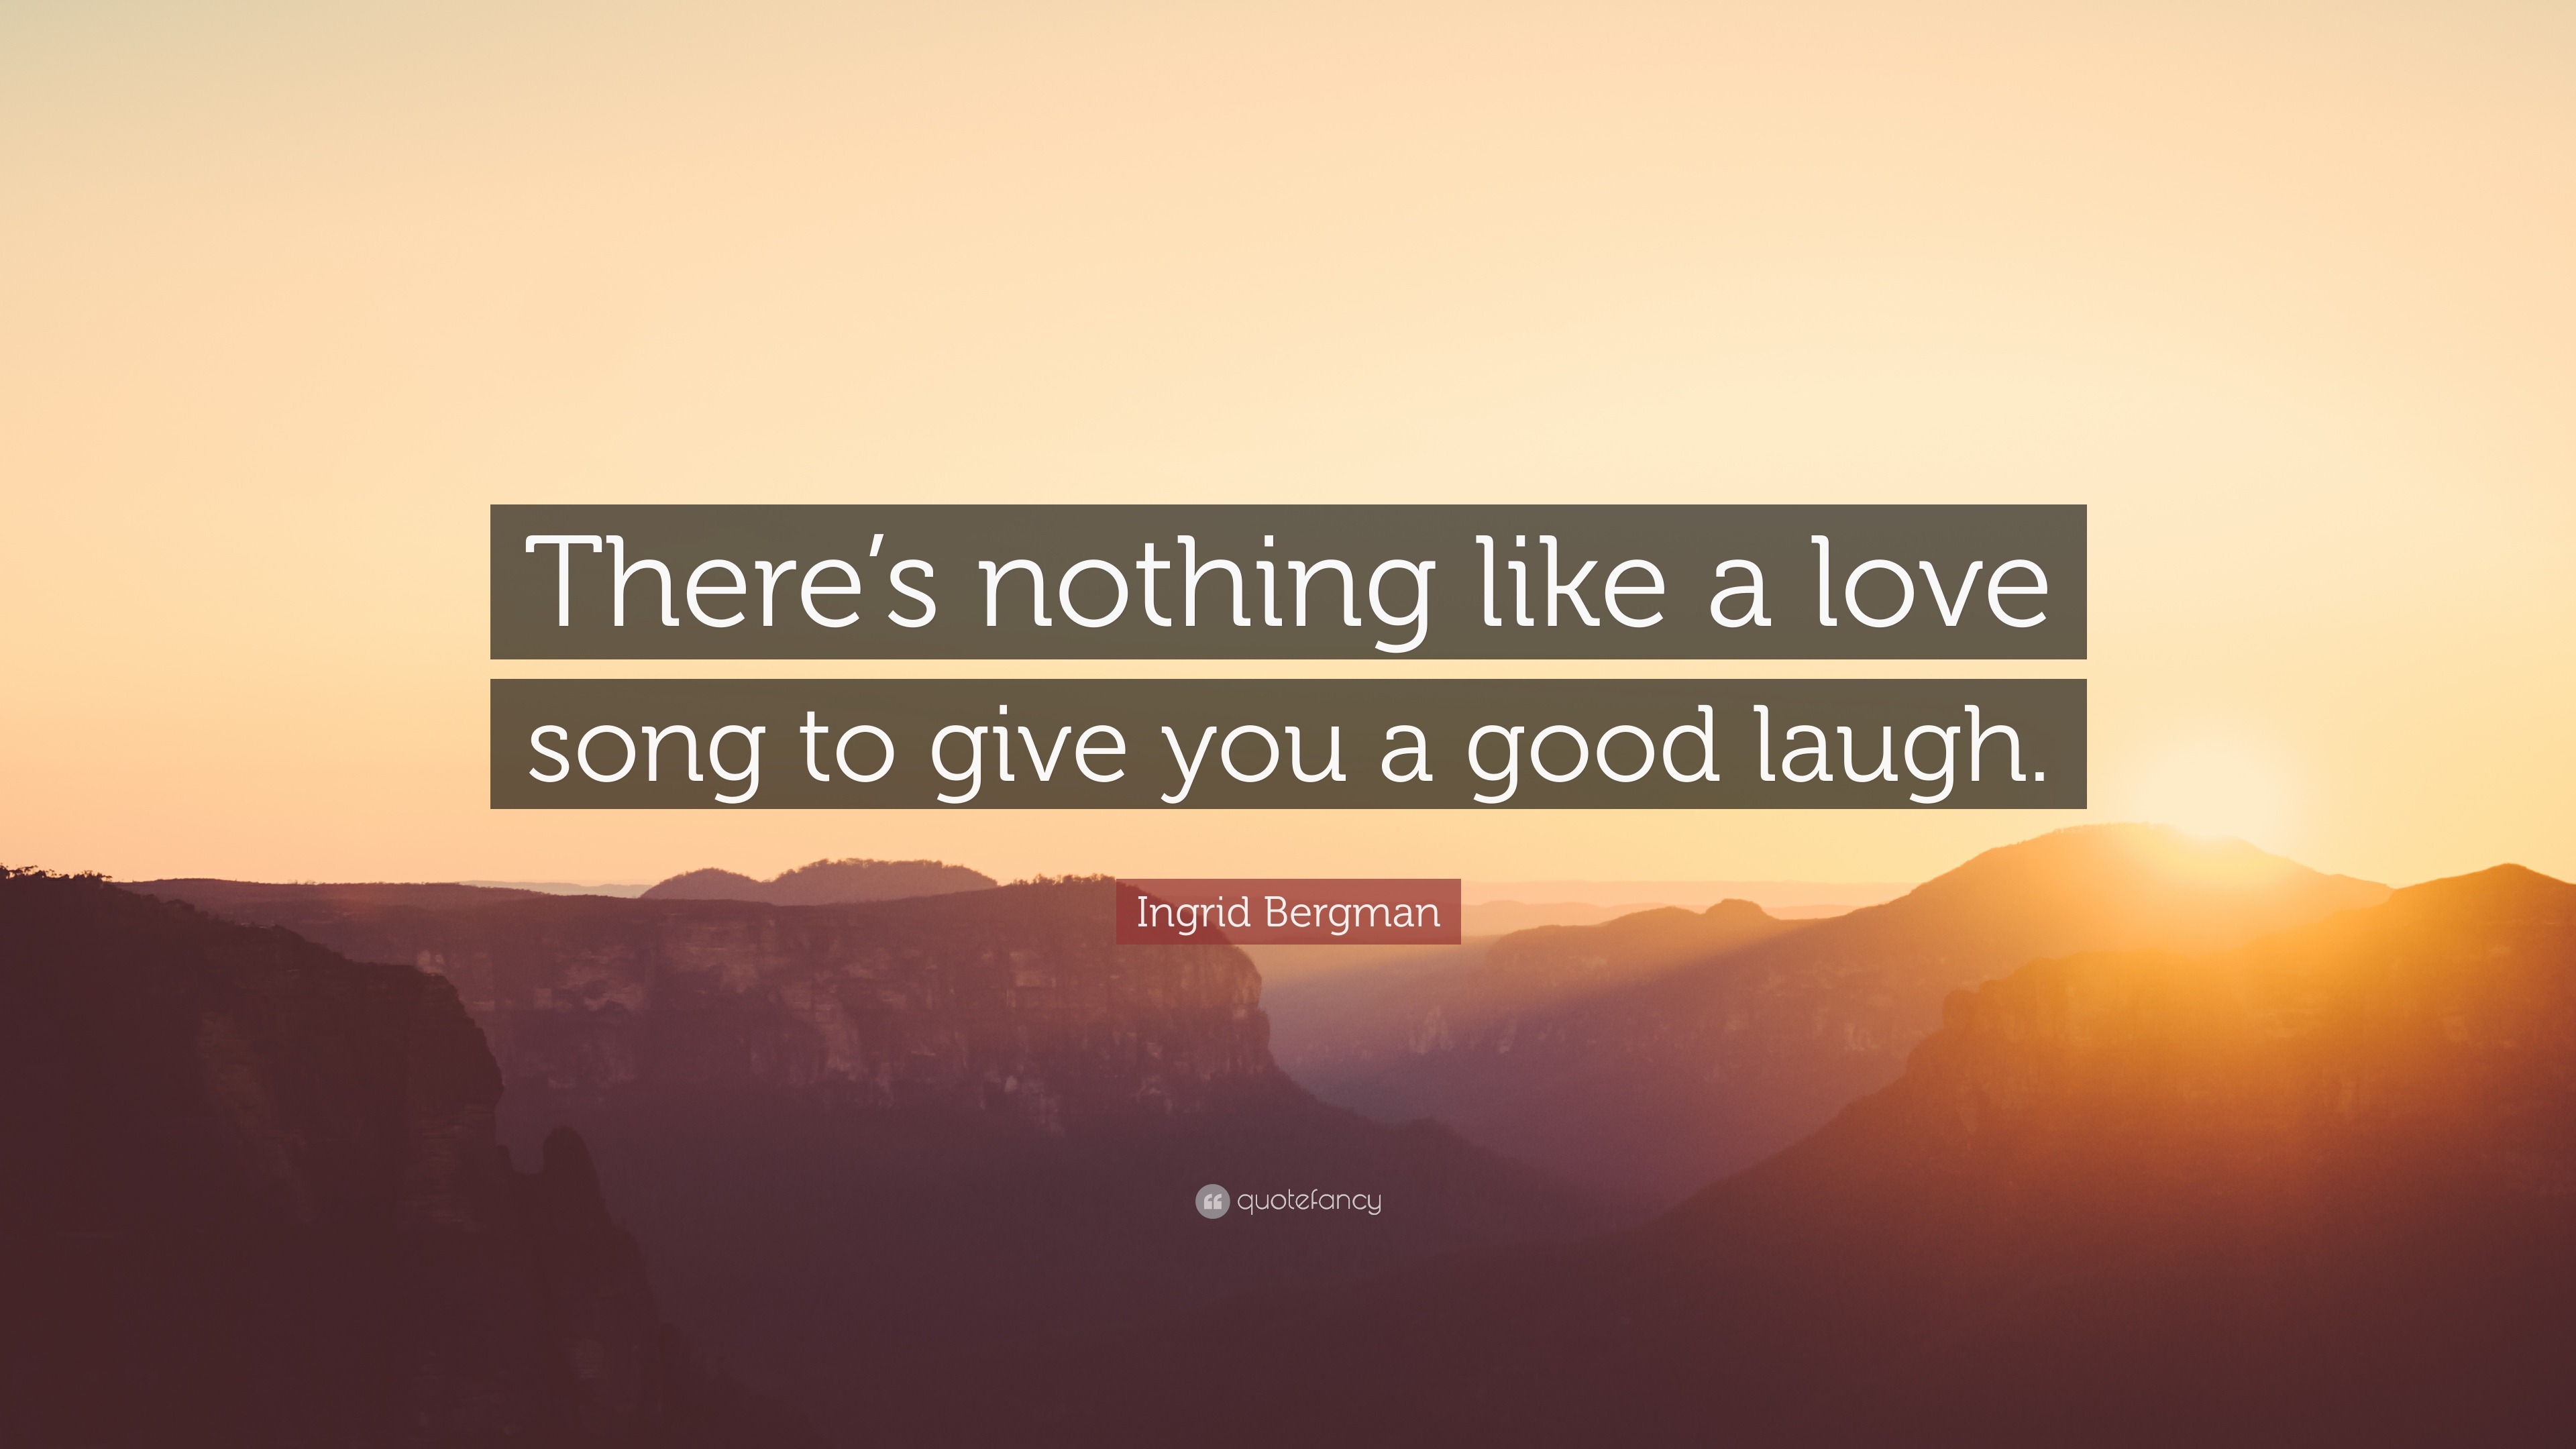 Ingrid Bergman Quote “There s nothing like a love song to give you a good